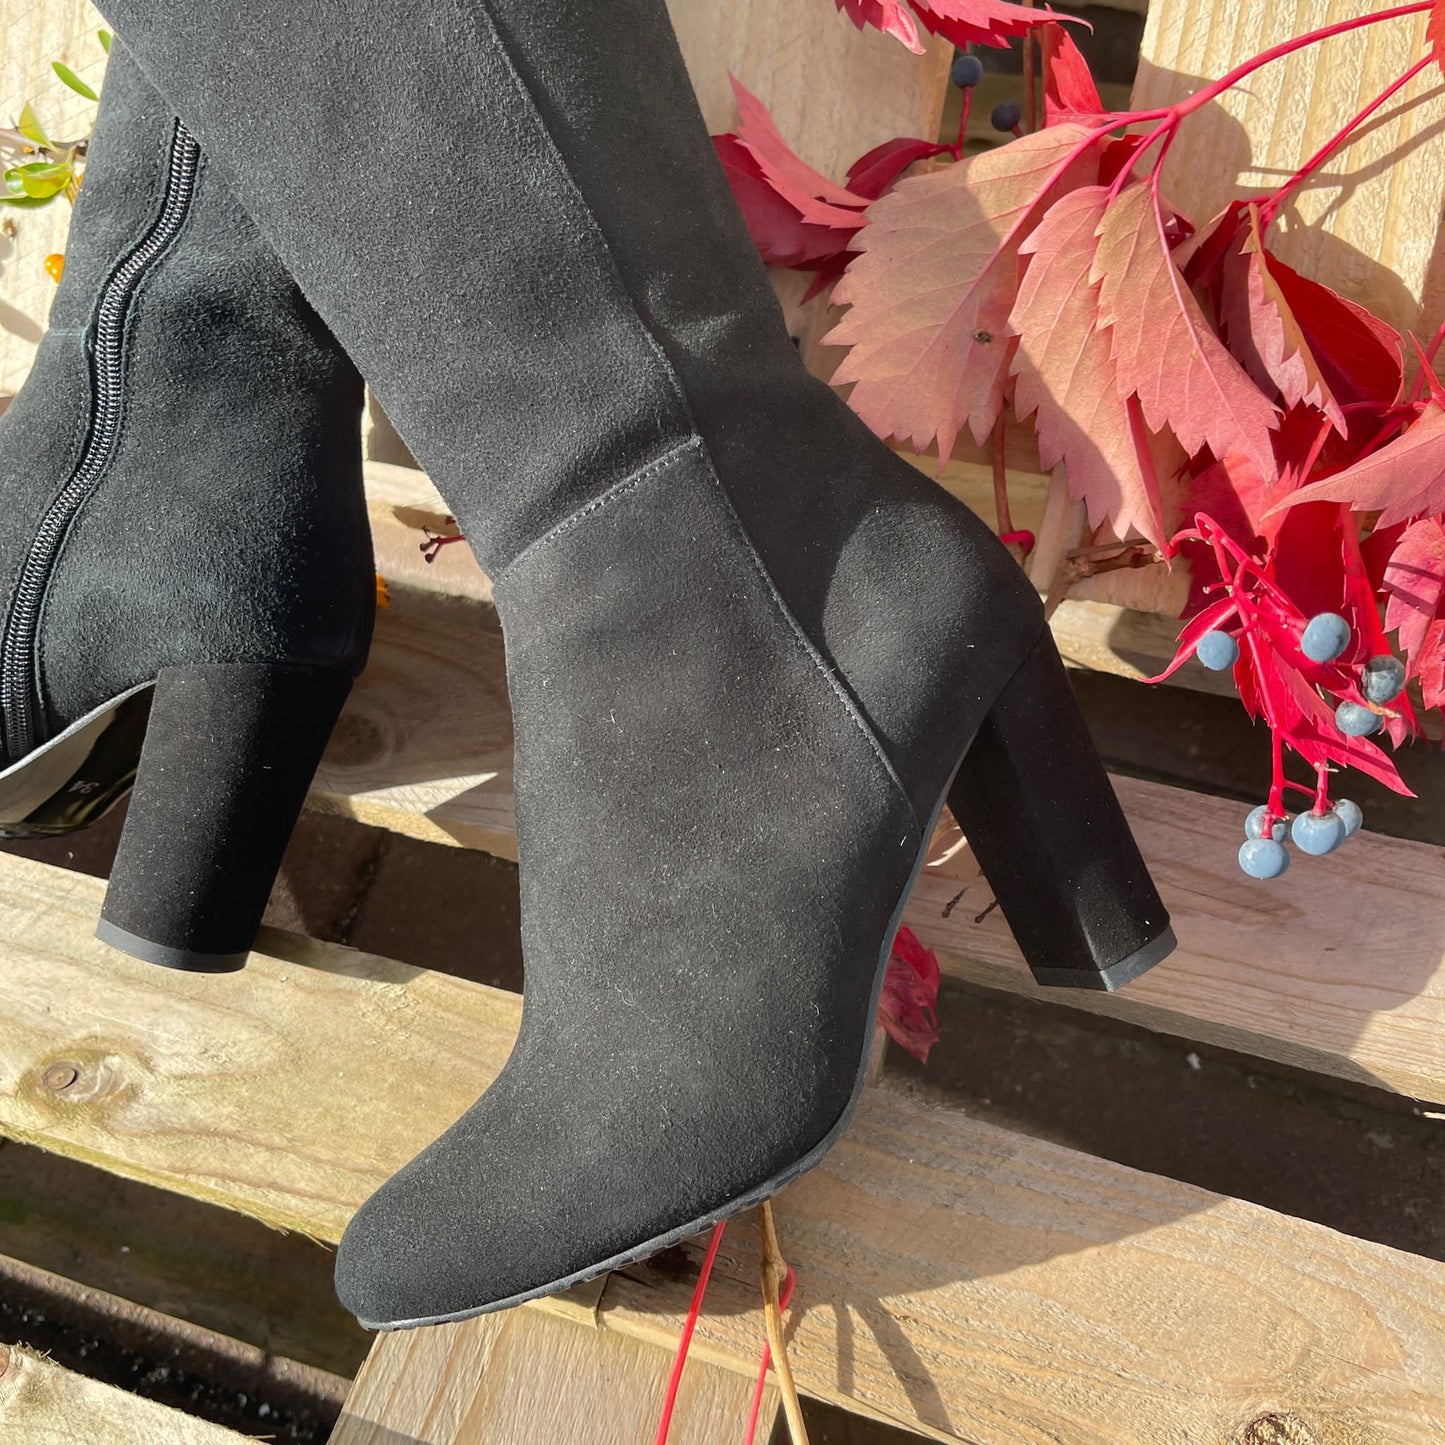 Petite size black suede knee high boots